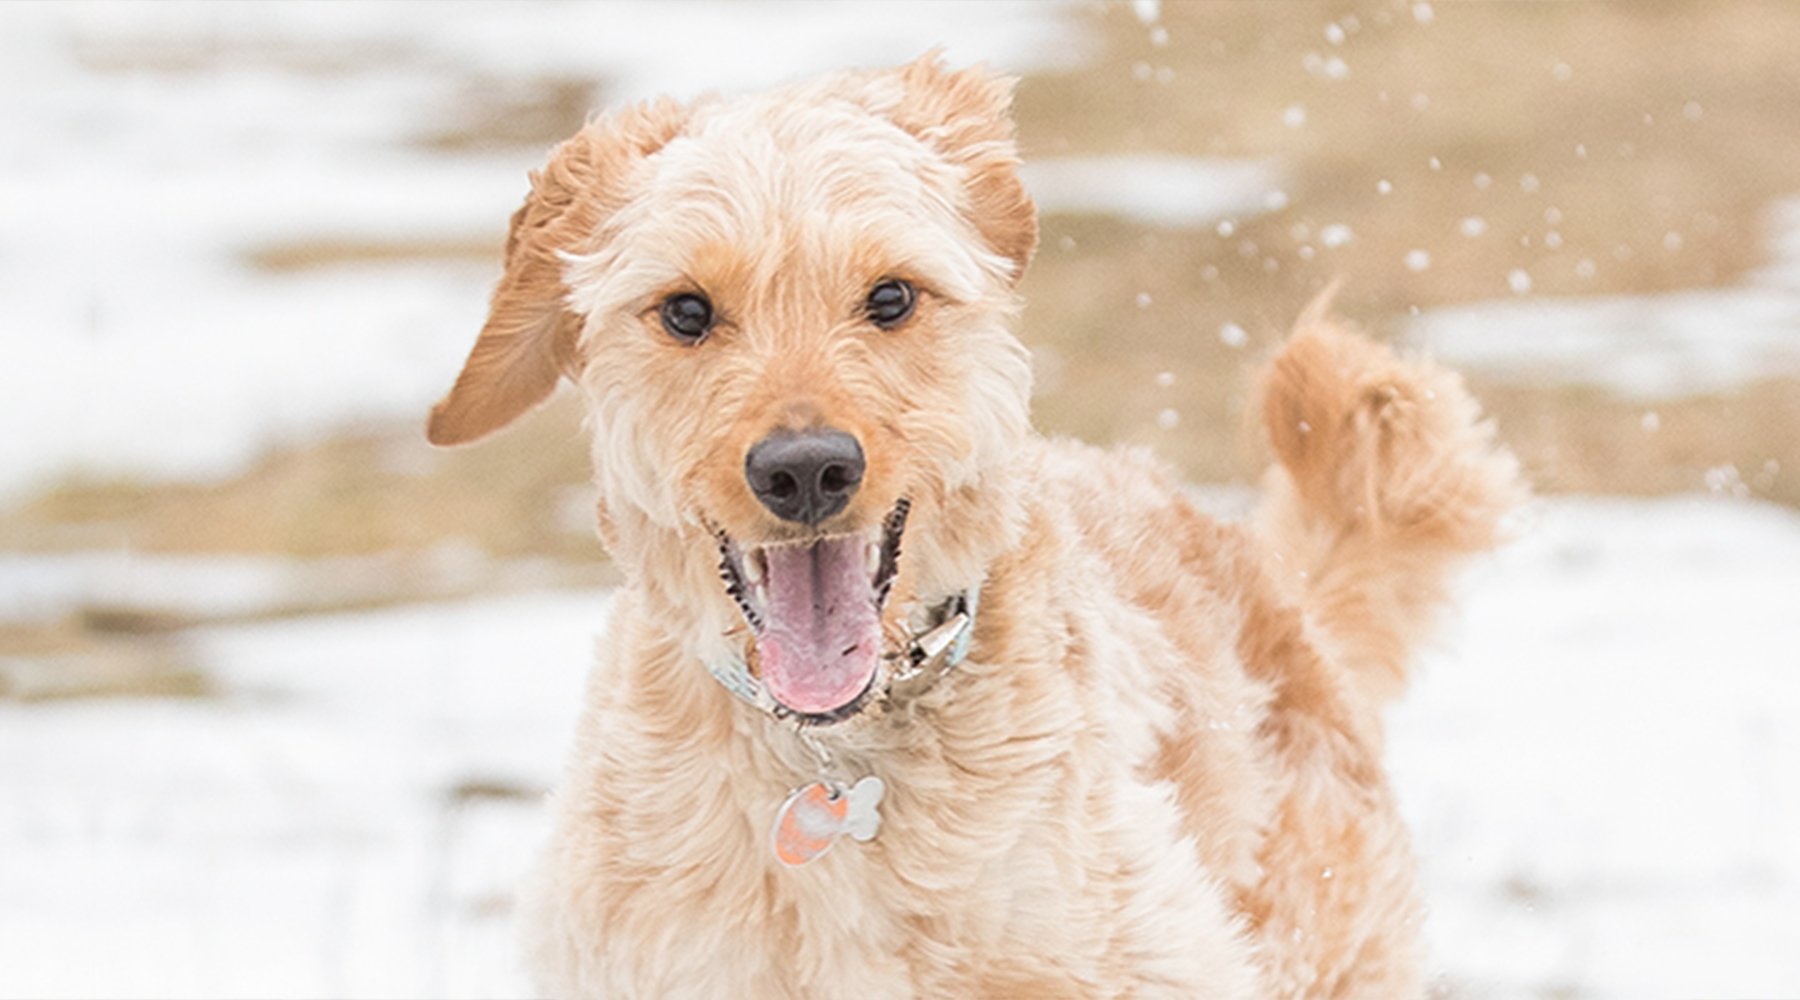 Aurora the goldendoodle bounds through a snowy area